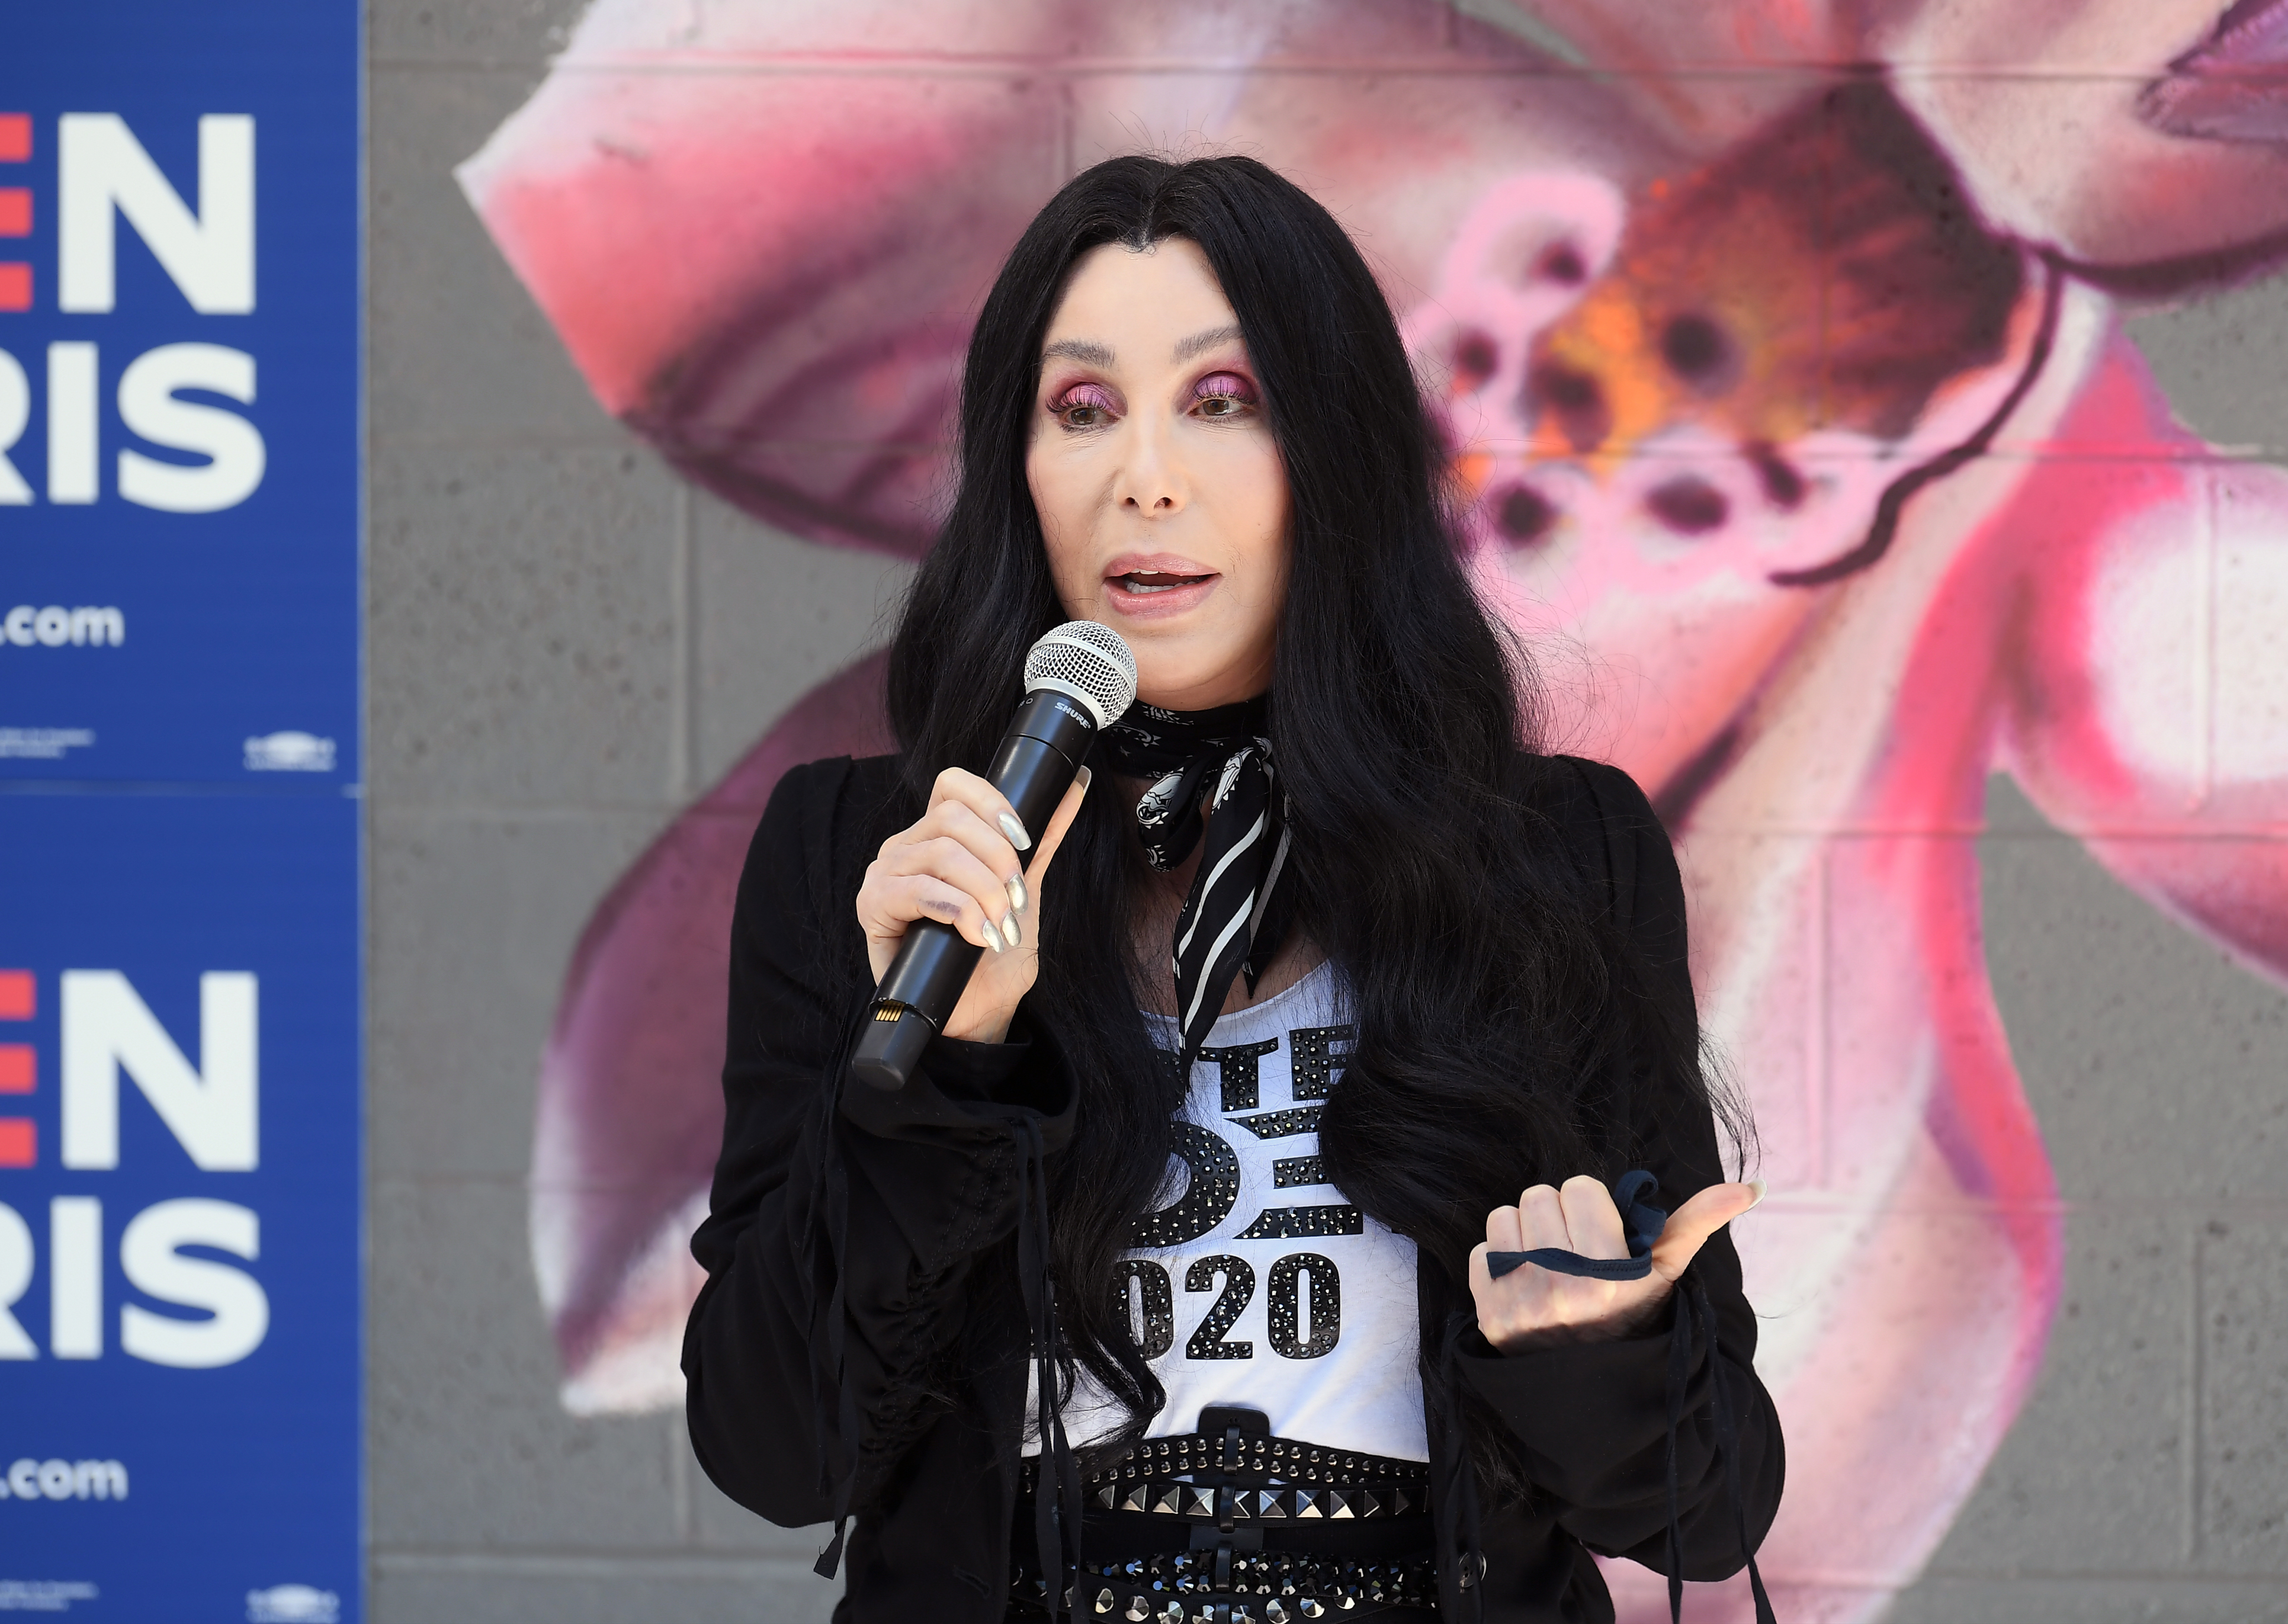 Cher on October 25, 2020 in Las Vegas, Nevada | Source: Getty Images